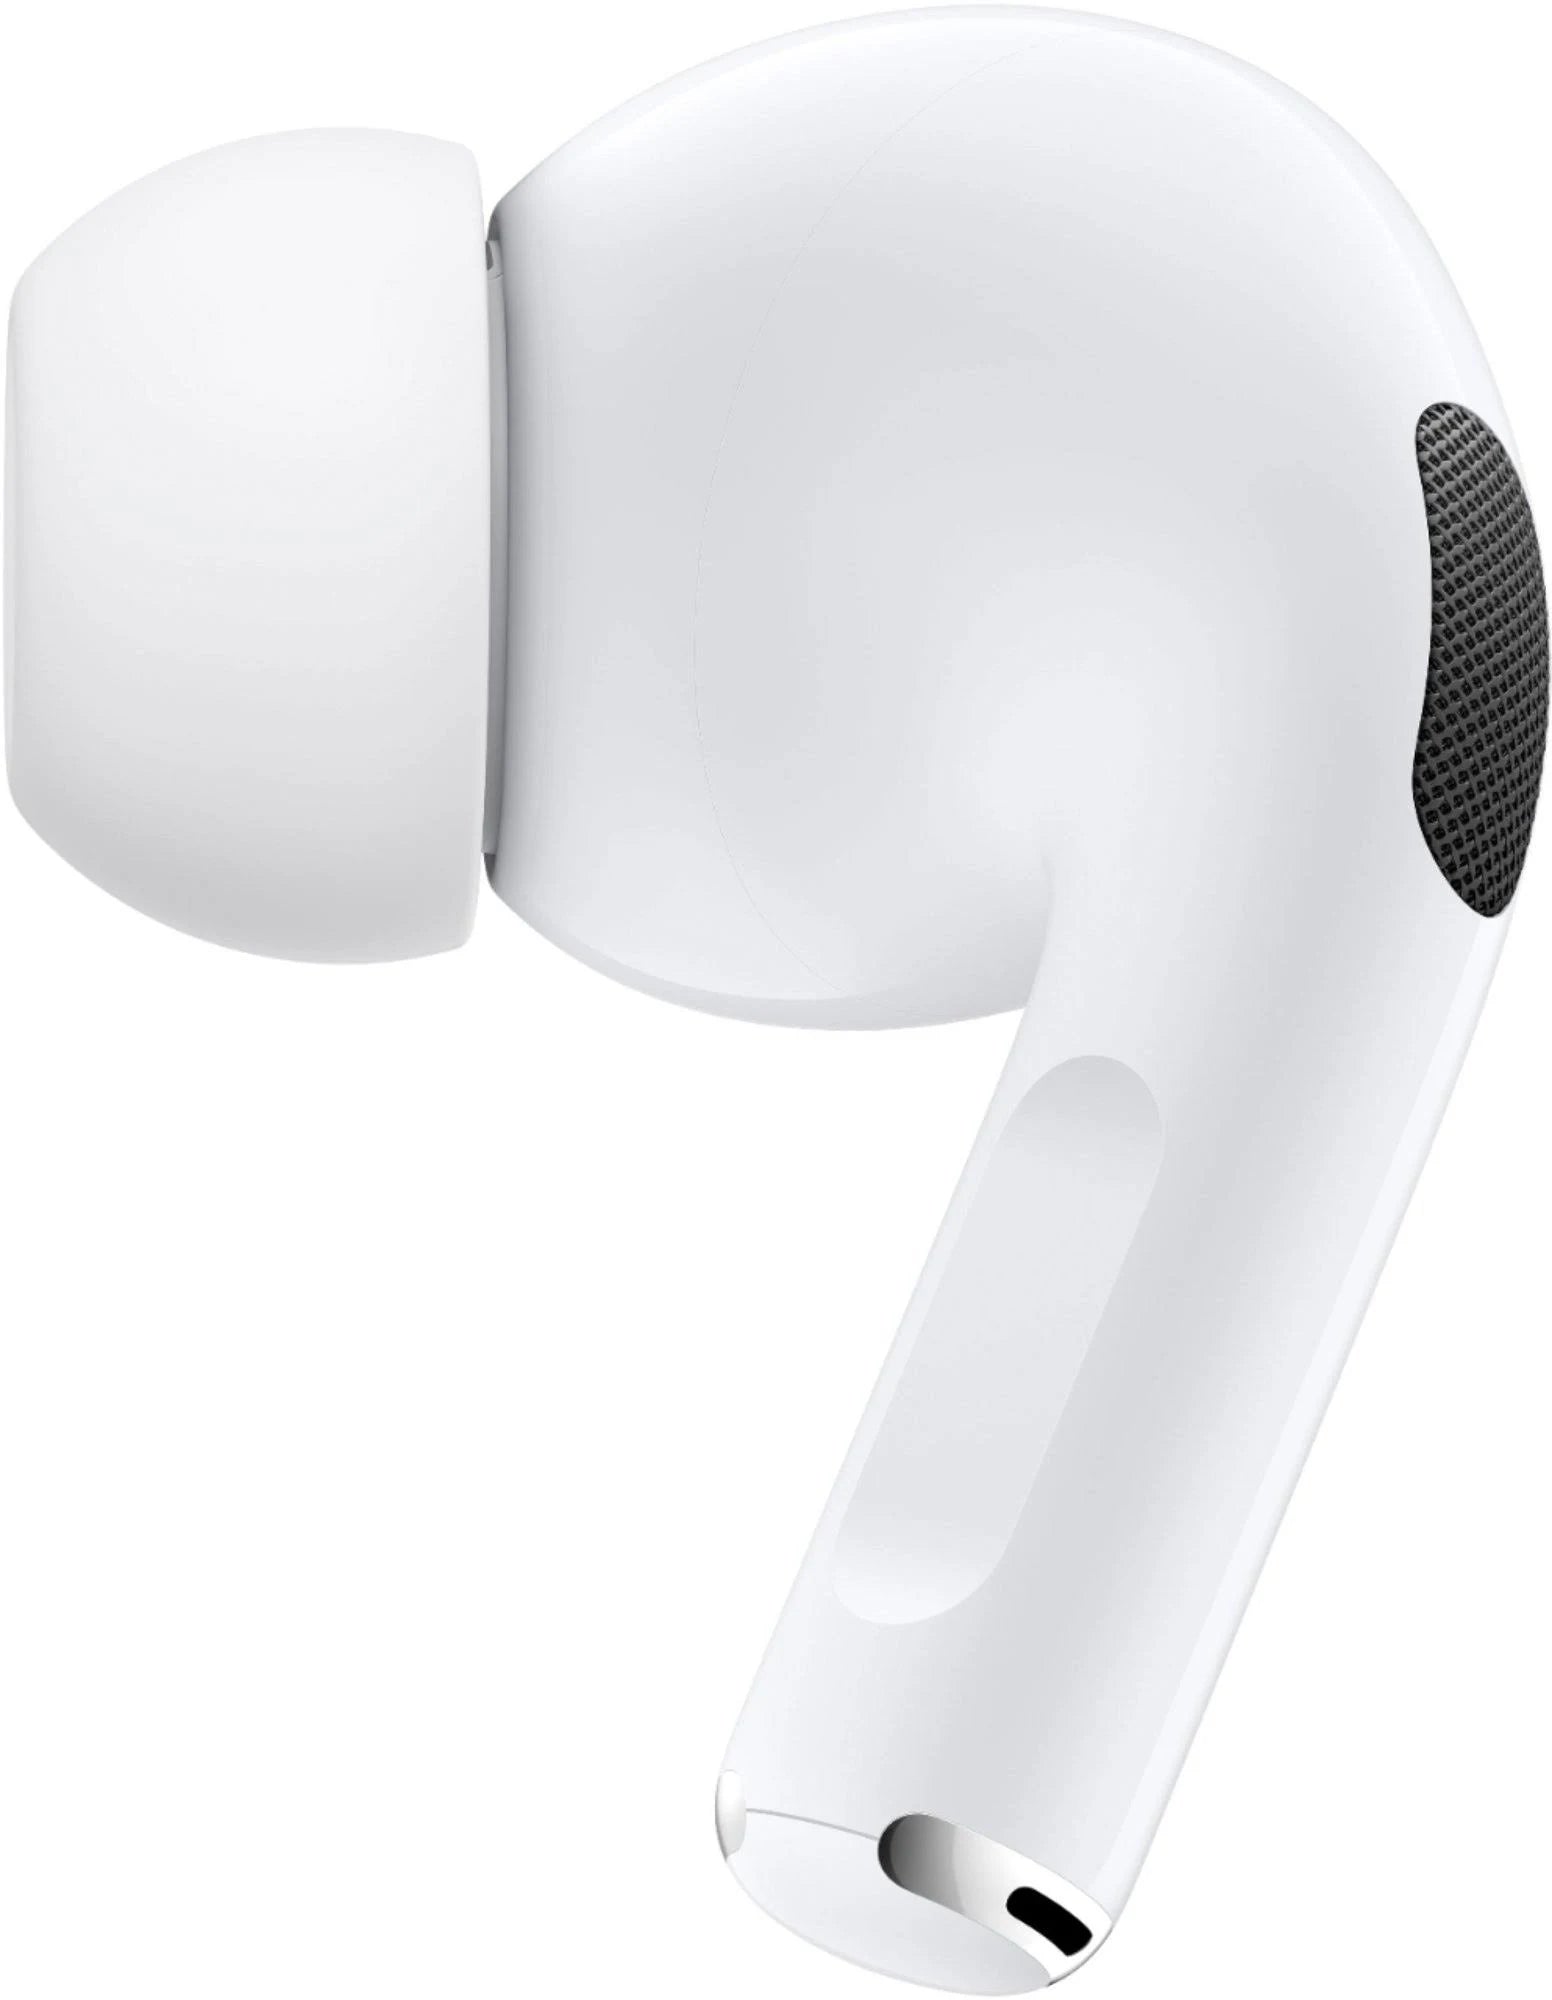 AirPods Pro 2nd Gen (New)